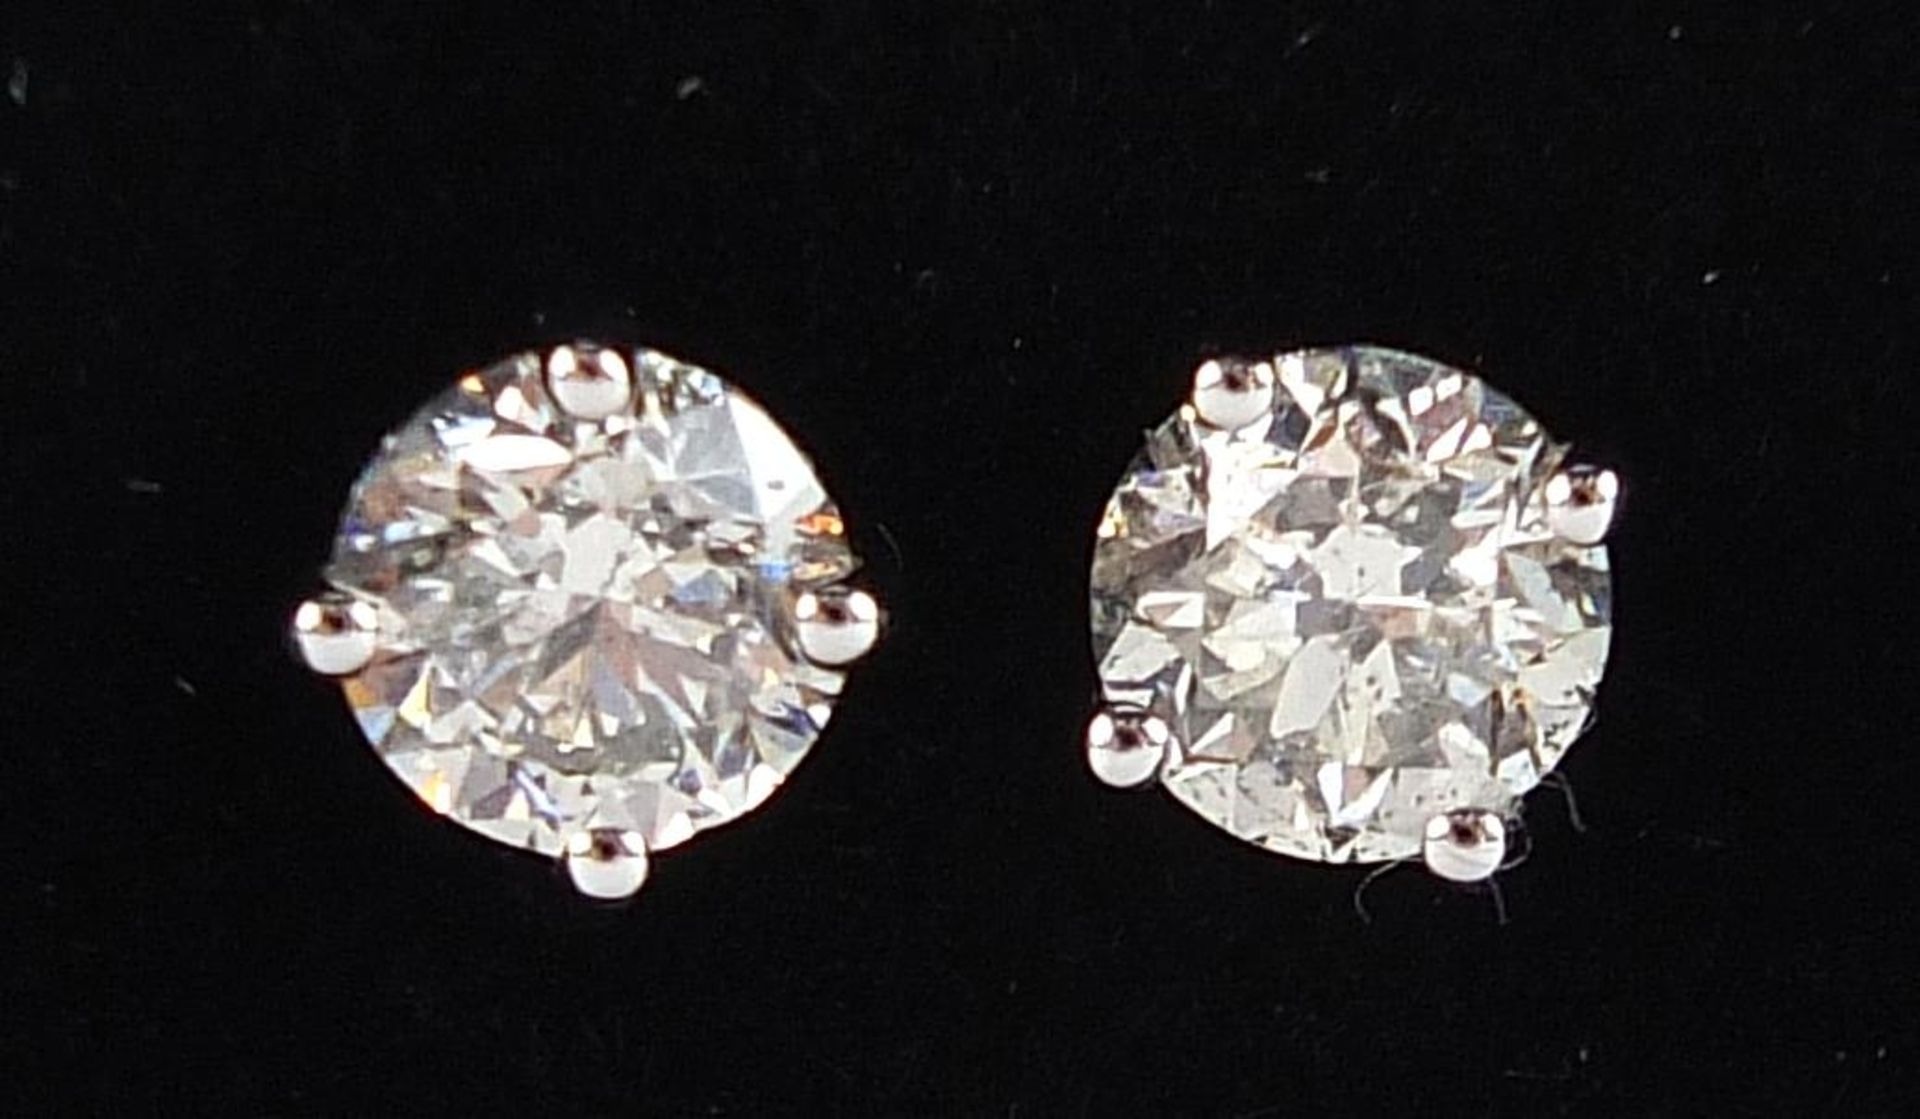 Pair of 18ct white gold diamond solitaire stud earrings, total diamond weight approximately 1.04 - Image 4 of 5